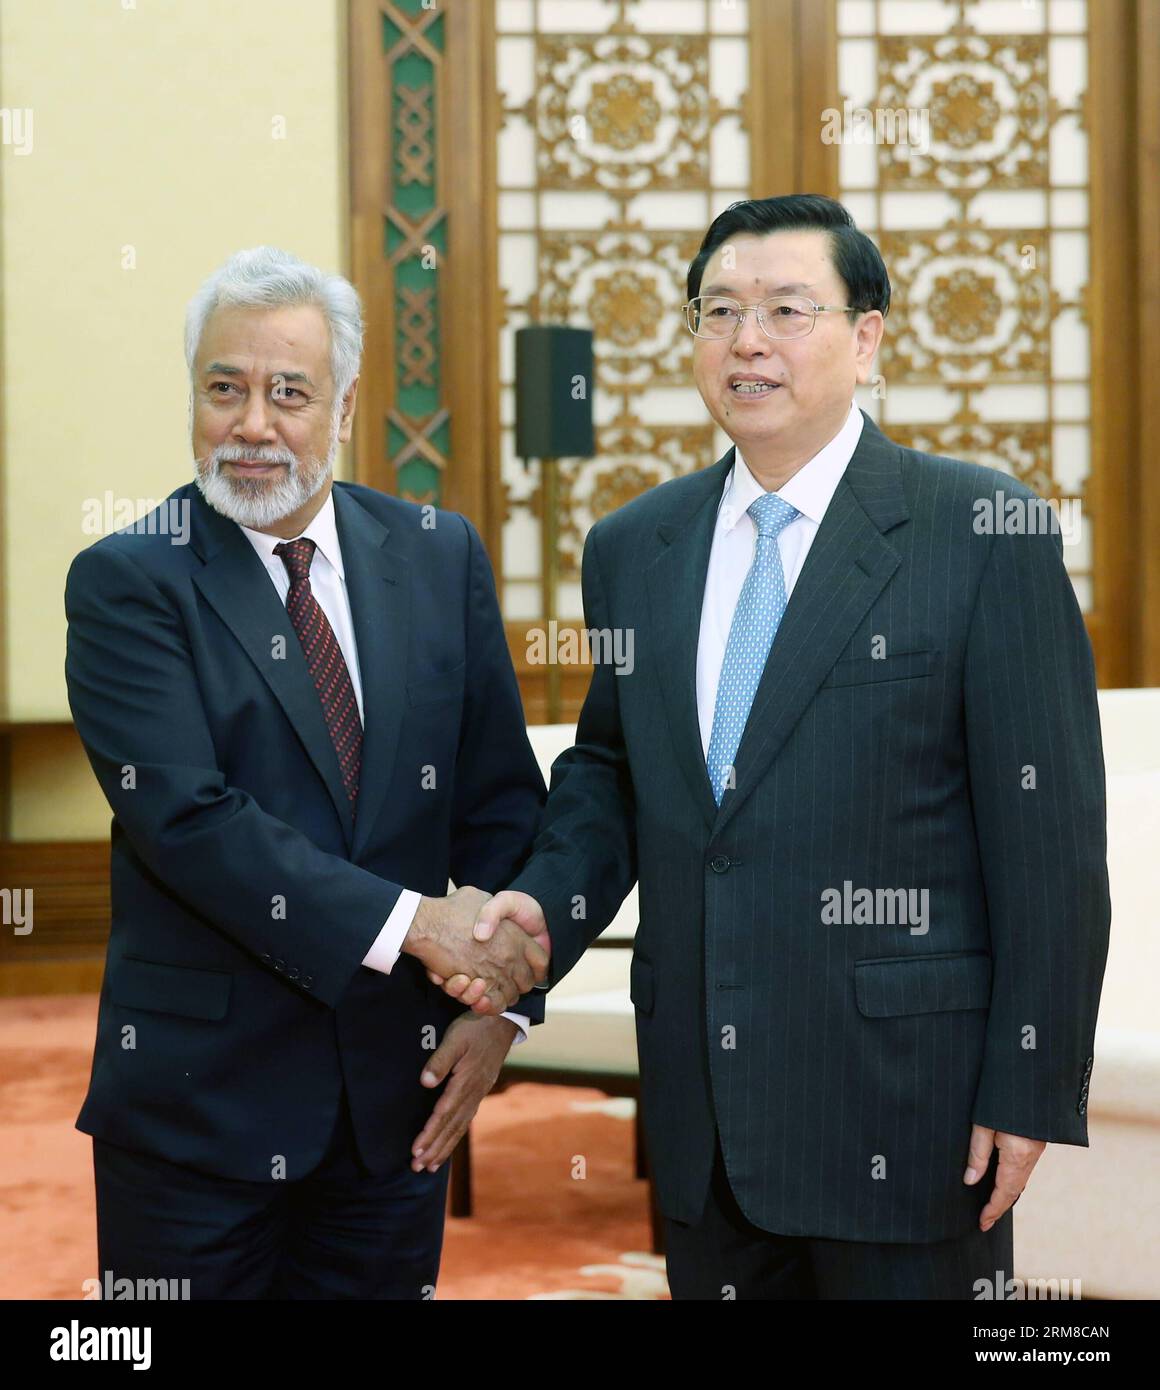 (140408) -- BEIJING, April 8, 2014 (Xinhua) -- Zhang Dejiang (R), chairman of China s National People s Congress Standing Committee, meets with Timor Leste s Prime Minister Jose Alexandre Xanana Gusmao, in Beijing, capital of China, April 8, 2014. (Xinhua/Yao Dawei) (yxb) CHINA-EAST TIMOR-ZHANG DEJIANG-MEETING(CN) PUBLICATIONxNOTxINxCHN   Beijing April 8 2014 XINHUA Zhang Dejiang r Chairman of China S National Celebrities S Congress thing Committee Meets With Timor Leste S Prime Ministers Jose Alexandre Xanana Gusmao in Beijing Capital of China April 8 2014 XINHUA Yao Dawei  China East Timor Z Stock Photo